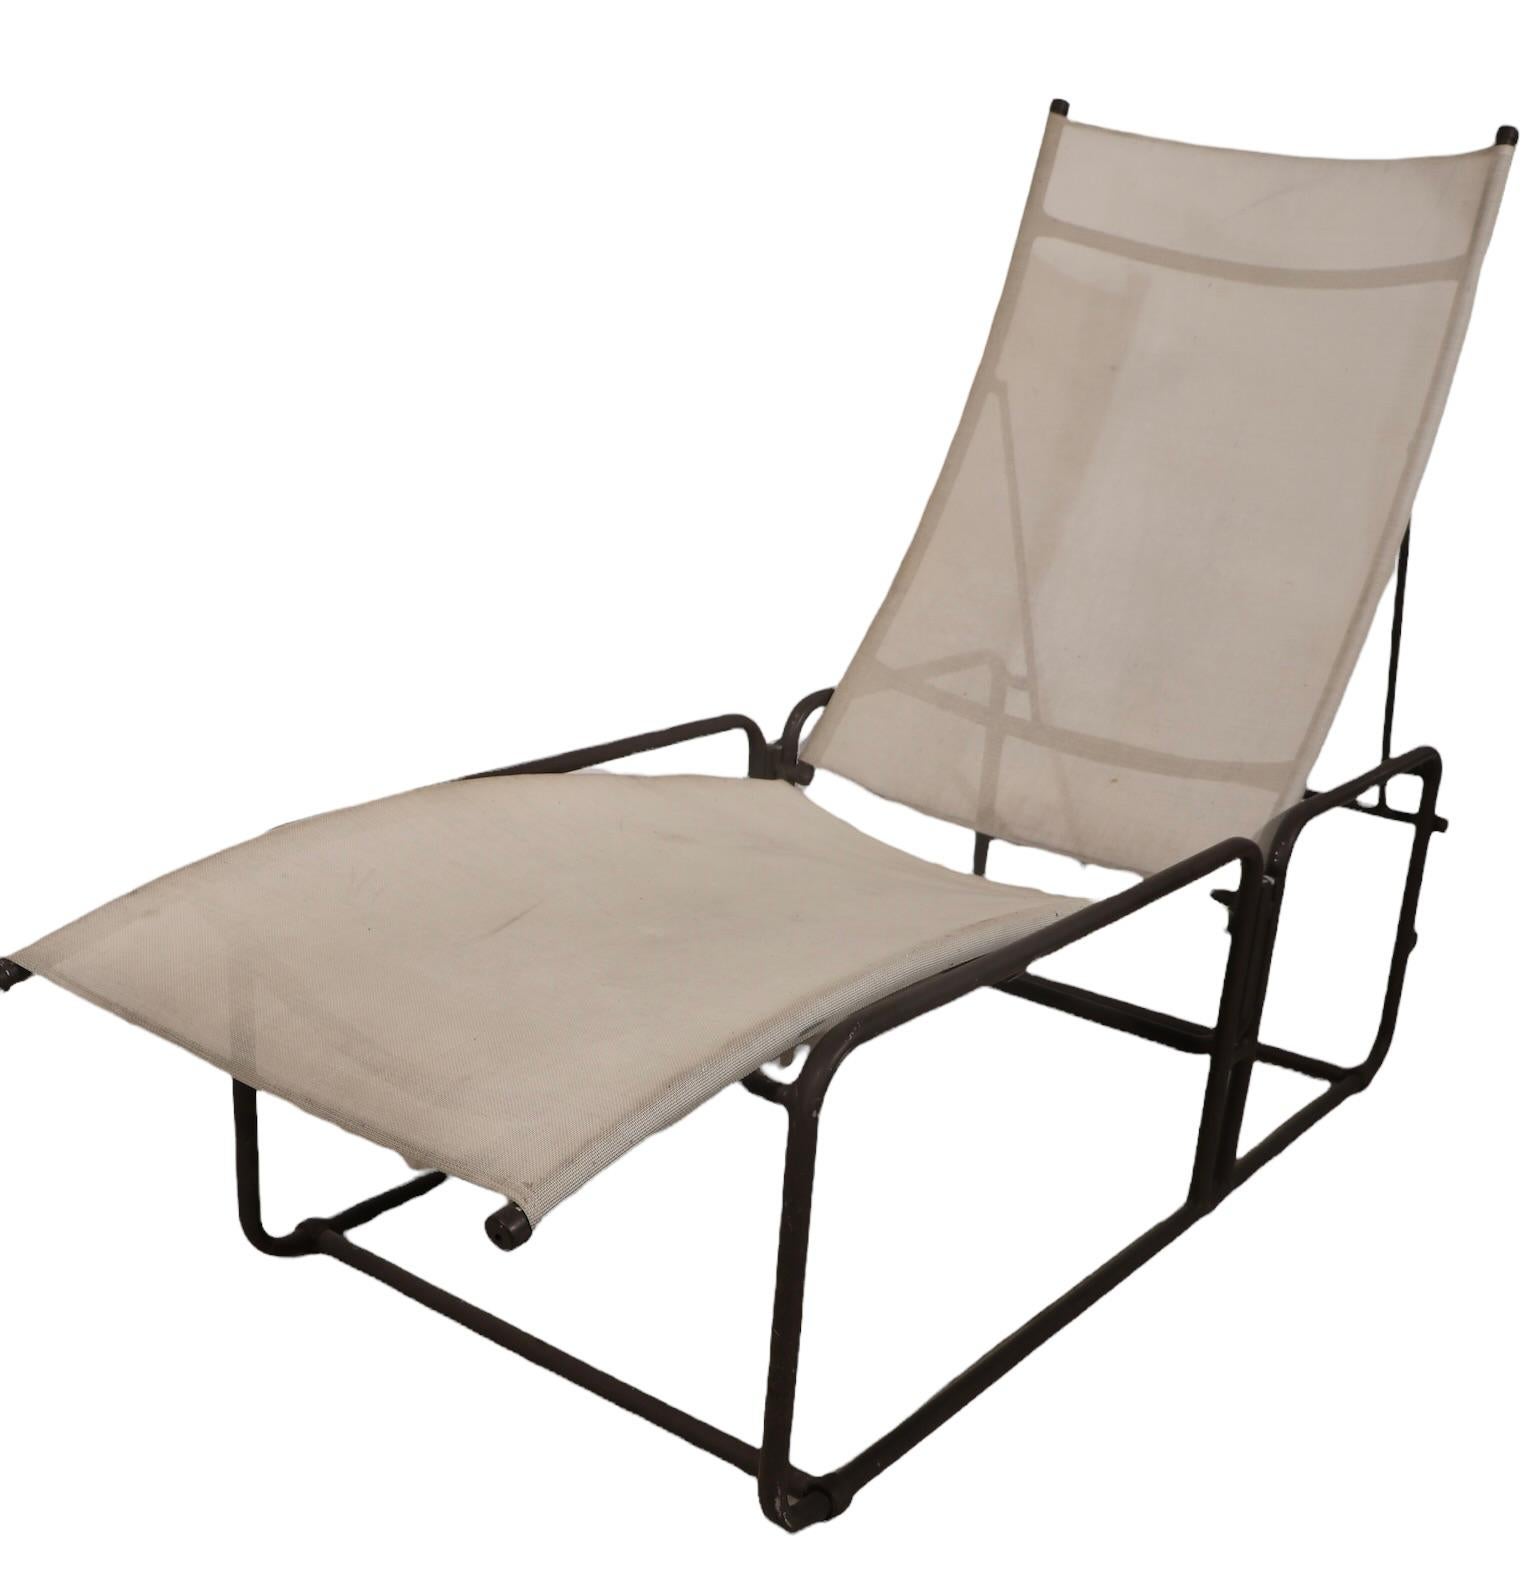 American  Brown Jordan Nomad Garden Patio Poolside Chaise Lounge Ca. 1970's For Sale